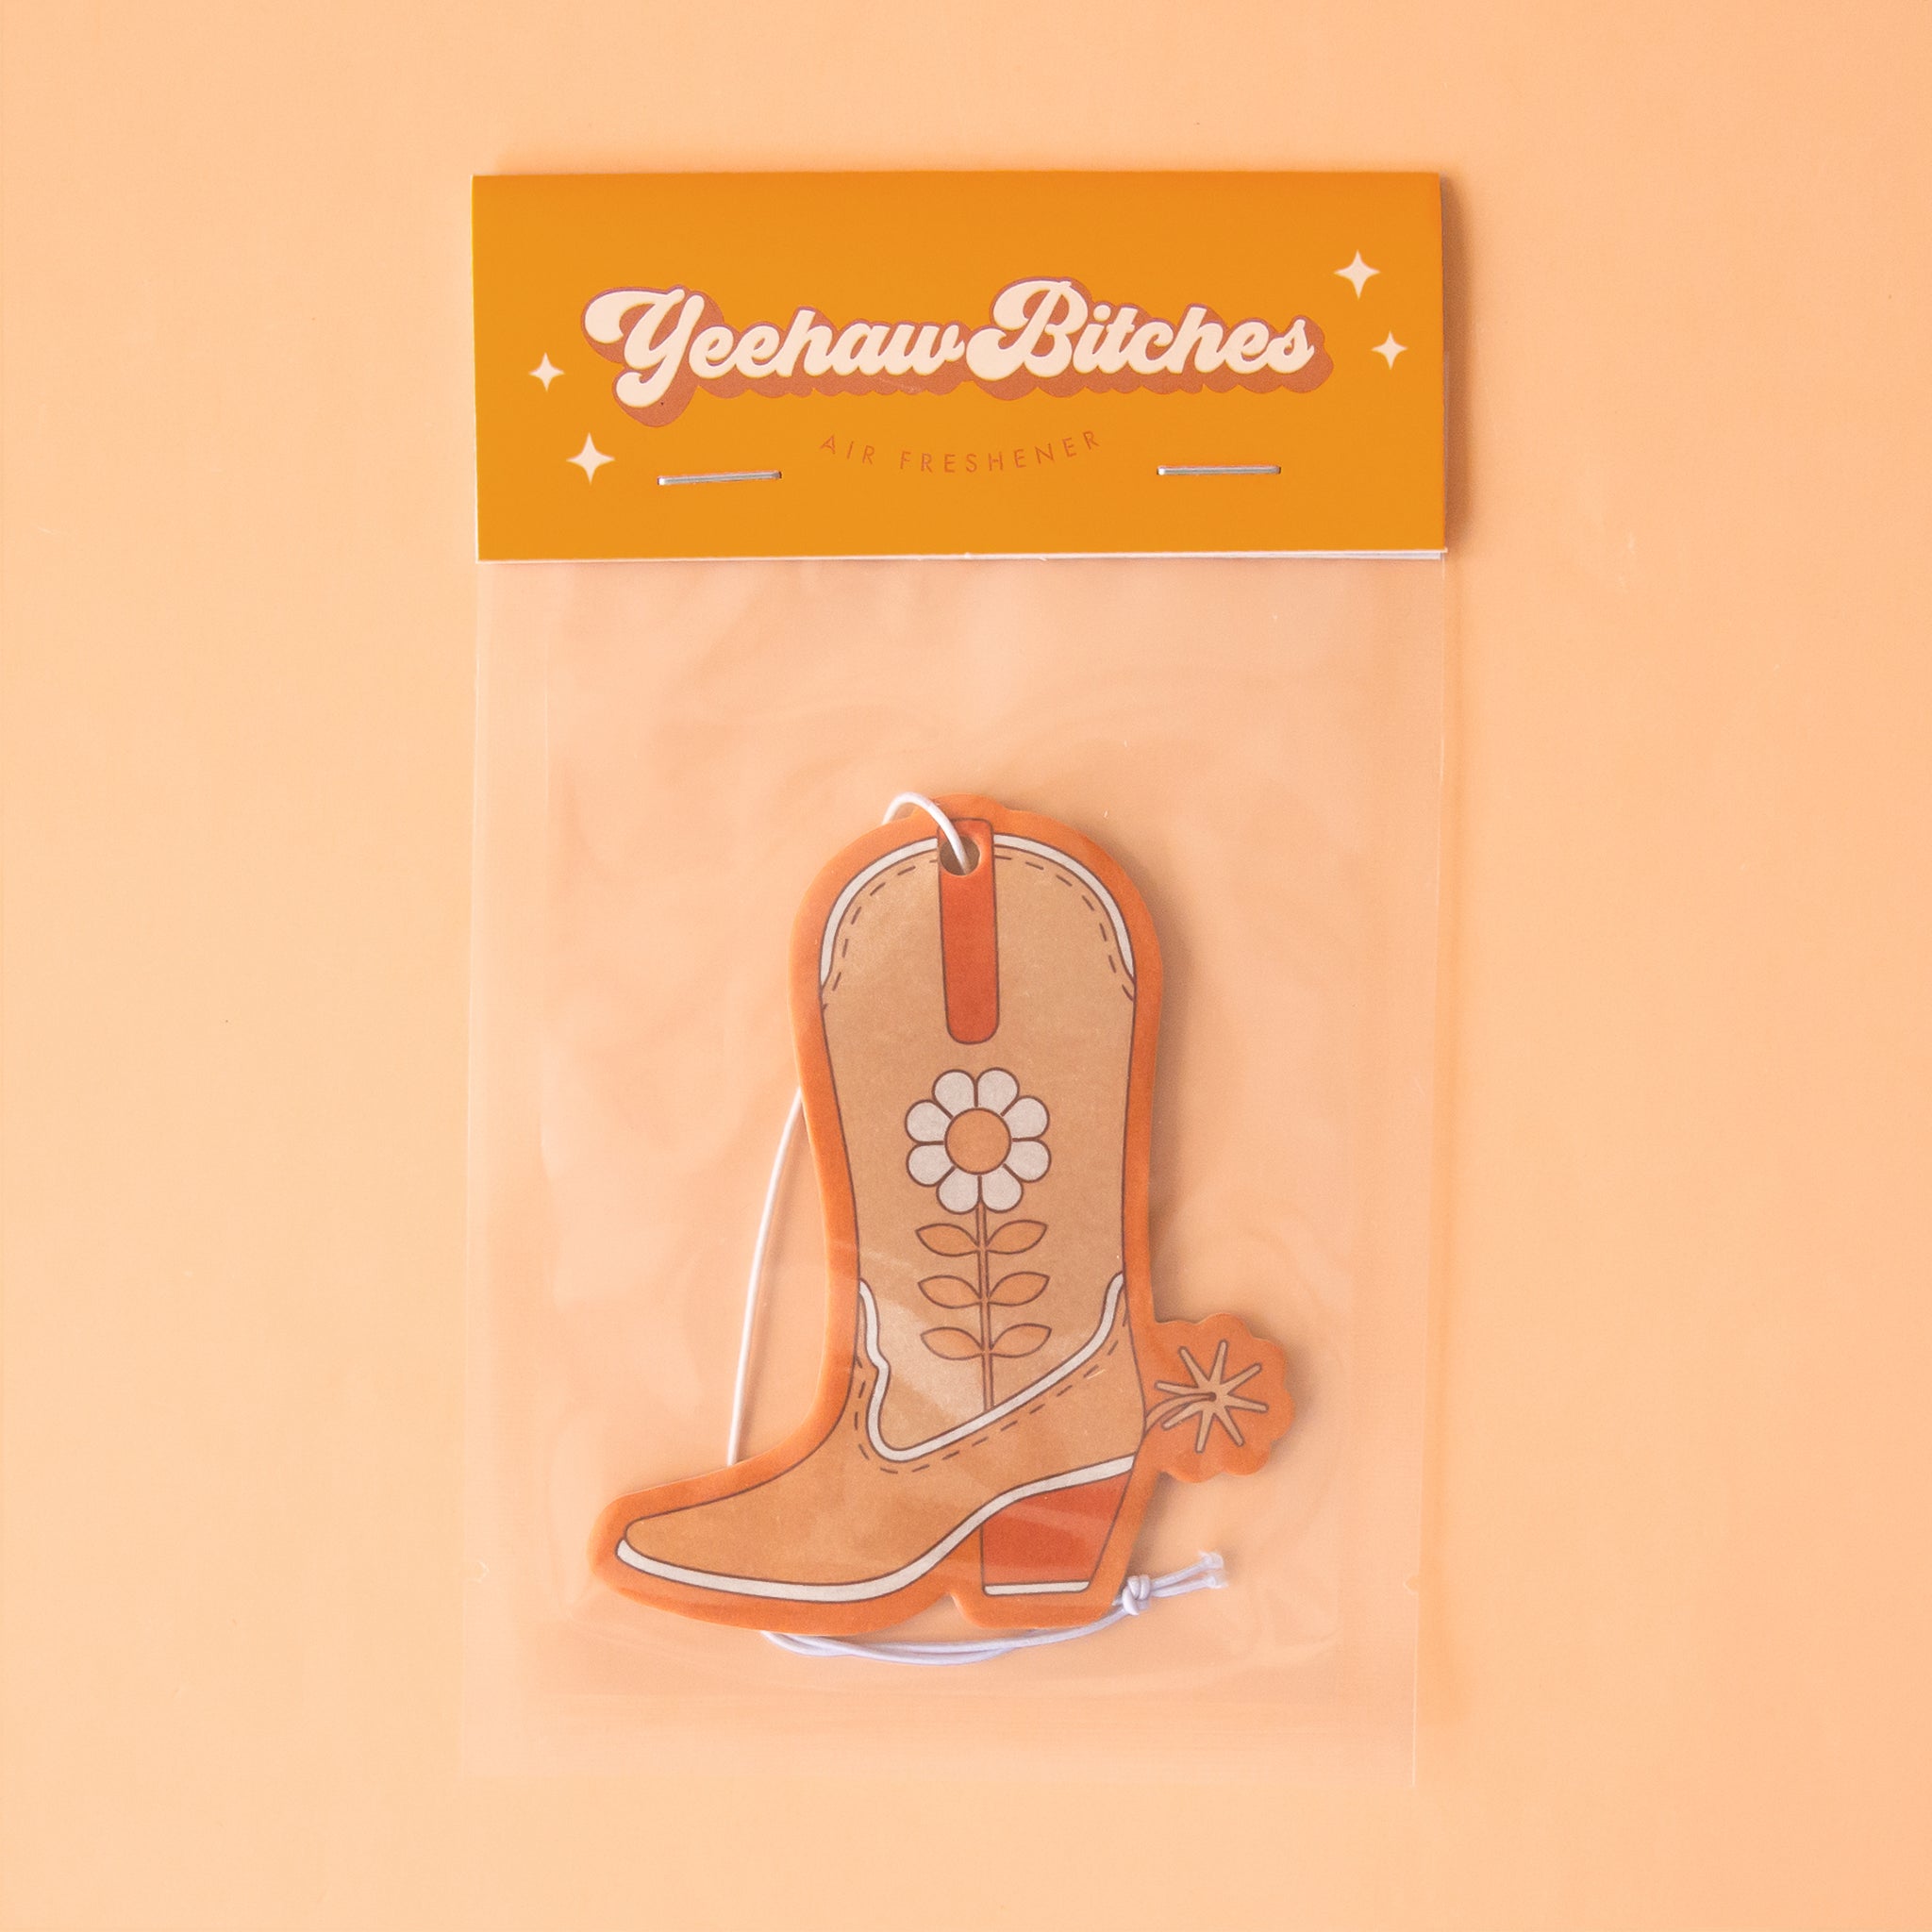 An orange cowboy boot shaped air freshener with a white string for hanging.